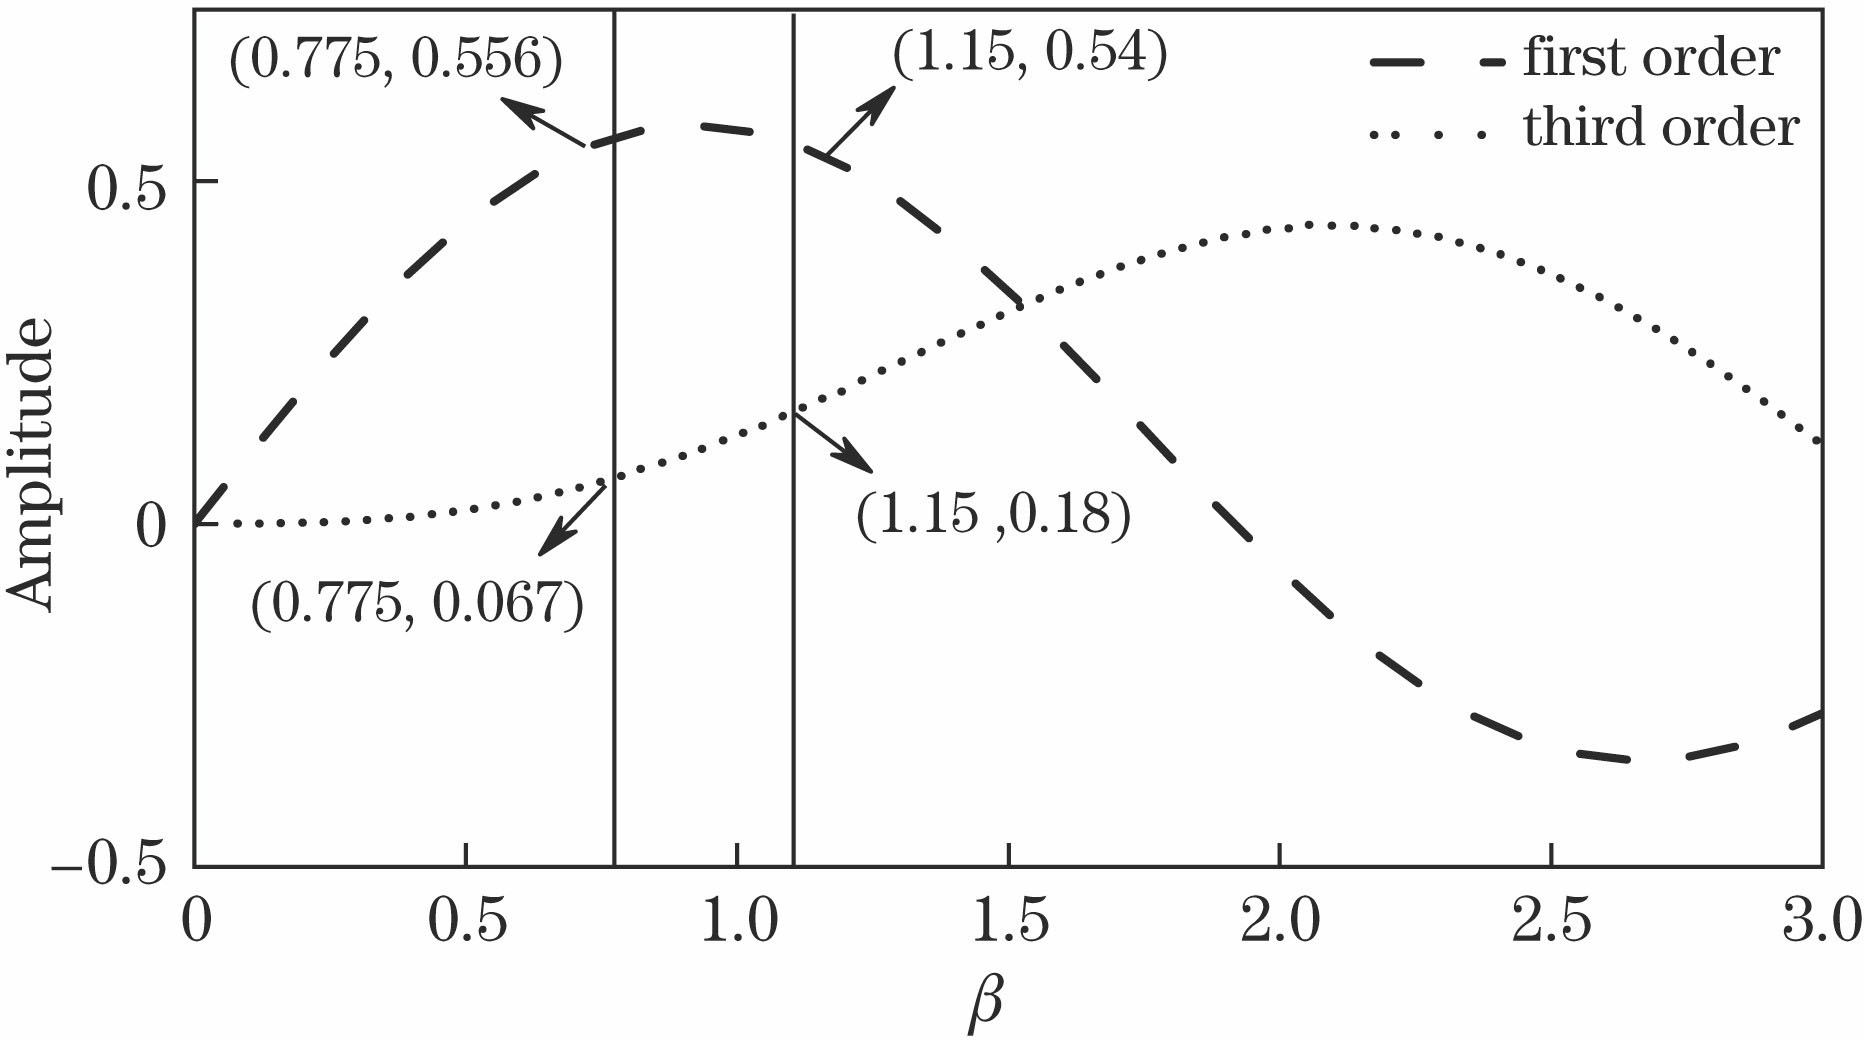 Curves of first-order and third-order Bessel functions versus β